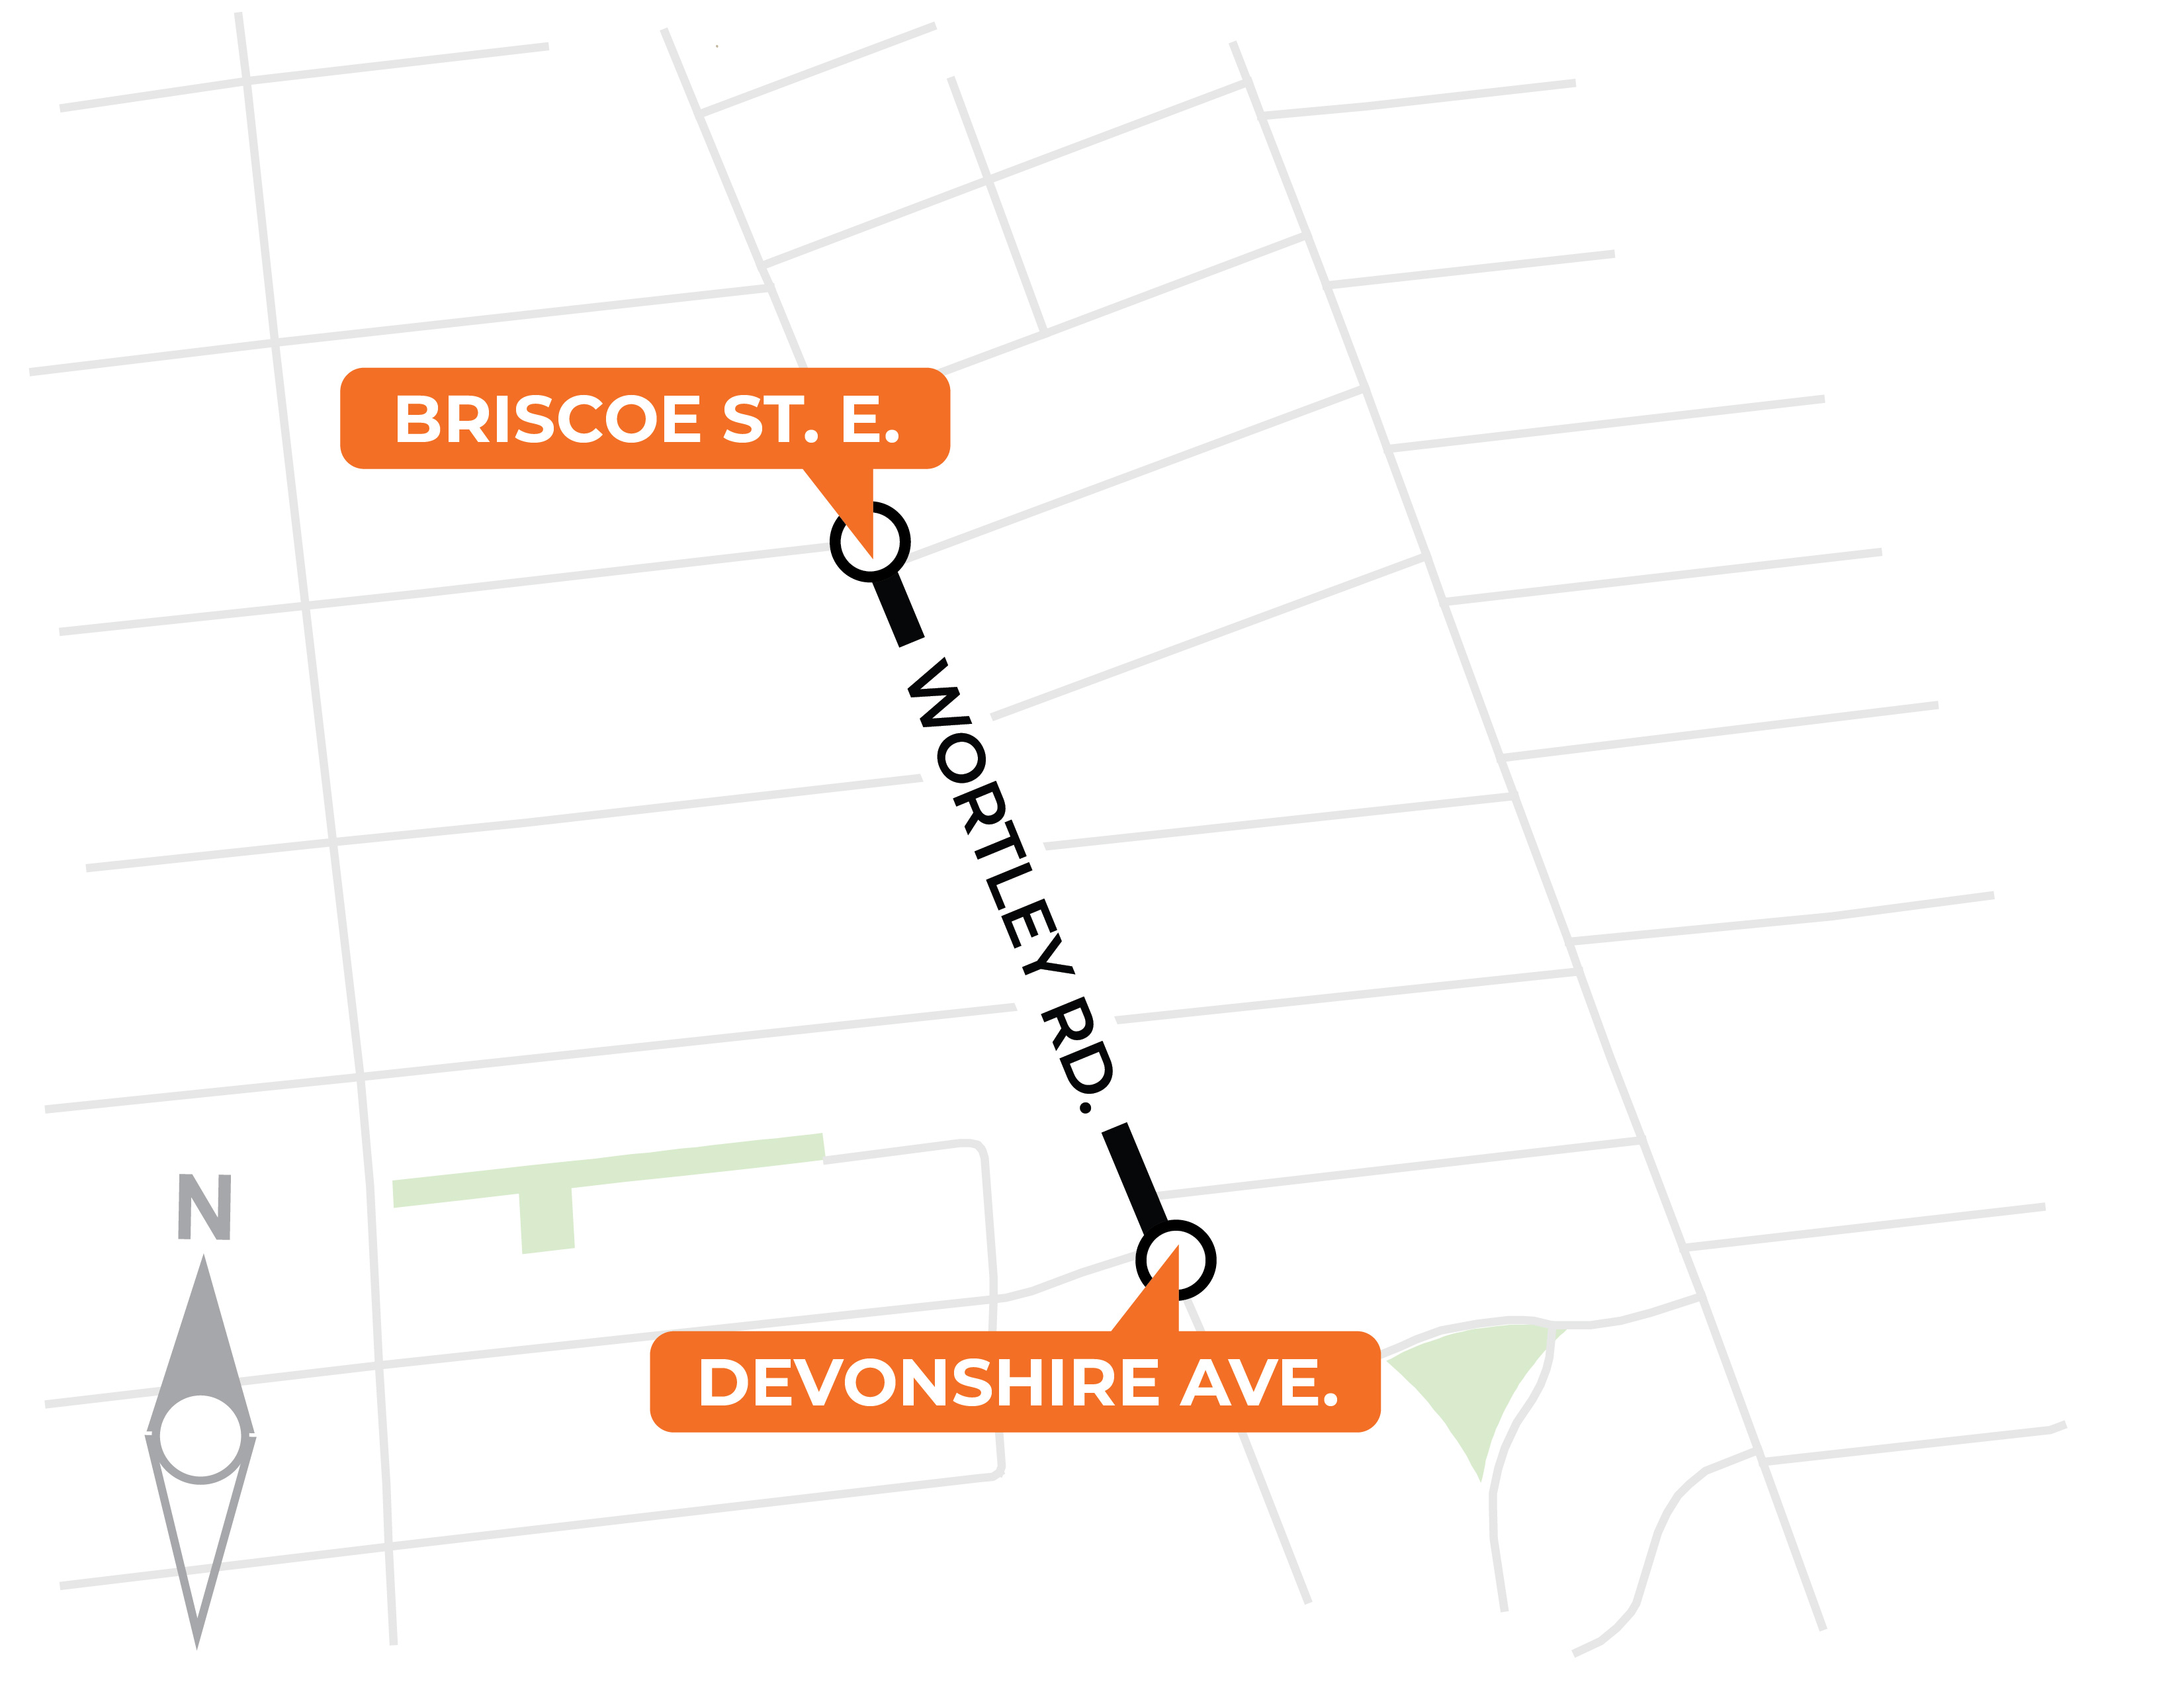 The City will be reconstructing Wortley Road from Briscoe Avenue to Devonshire Avenue. For more information, please contact Doug Harron at dharron@london.ca or by calling 519-661-2489 x 4987